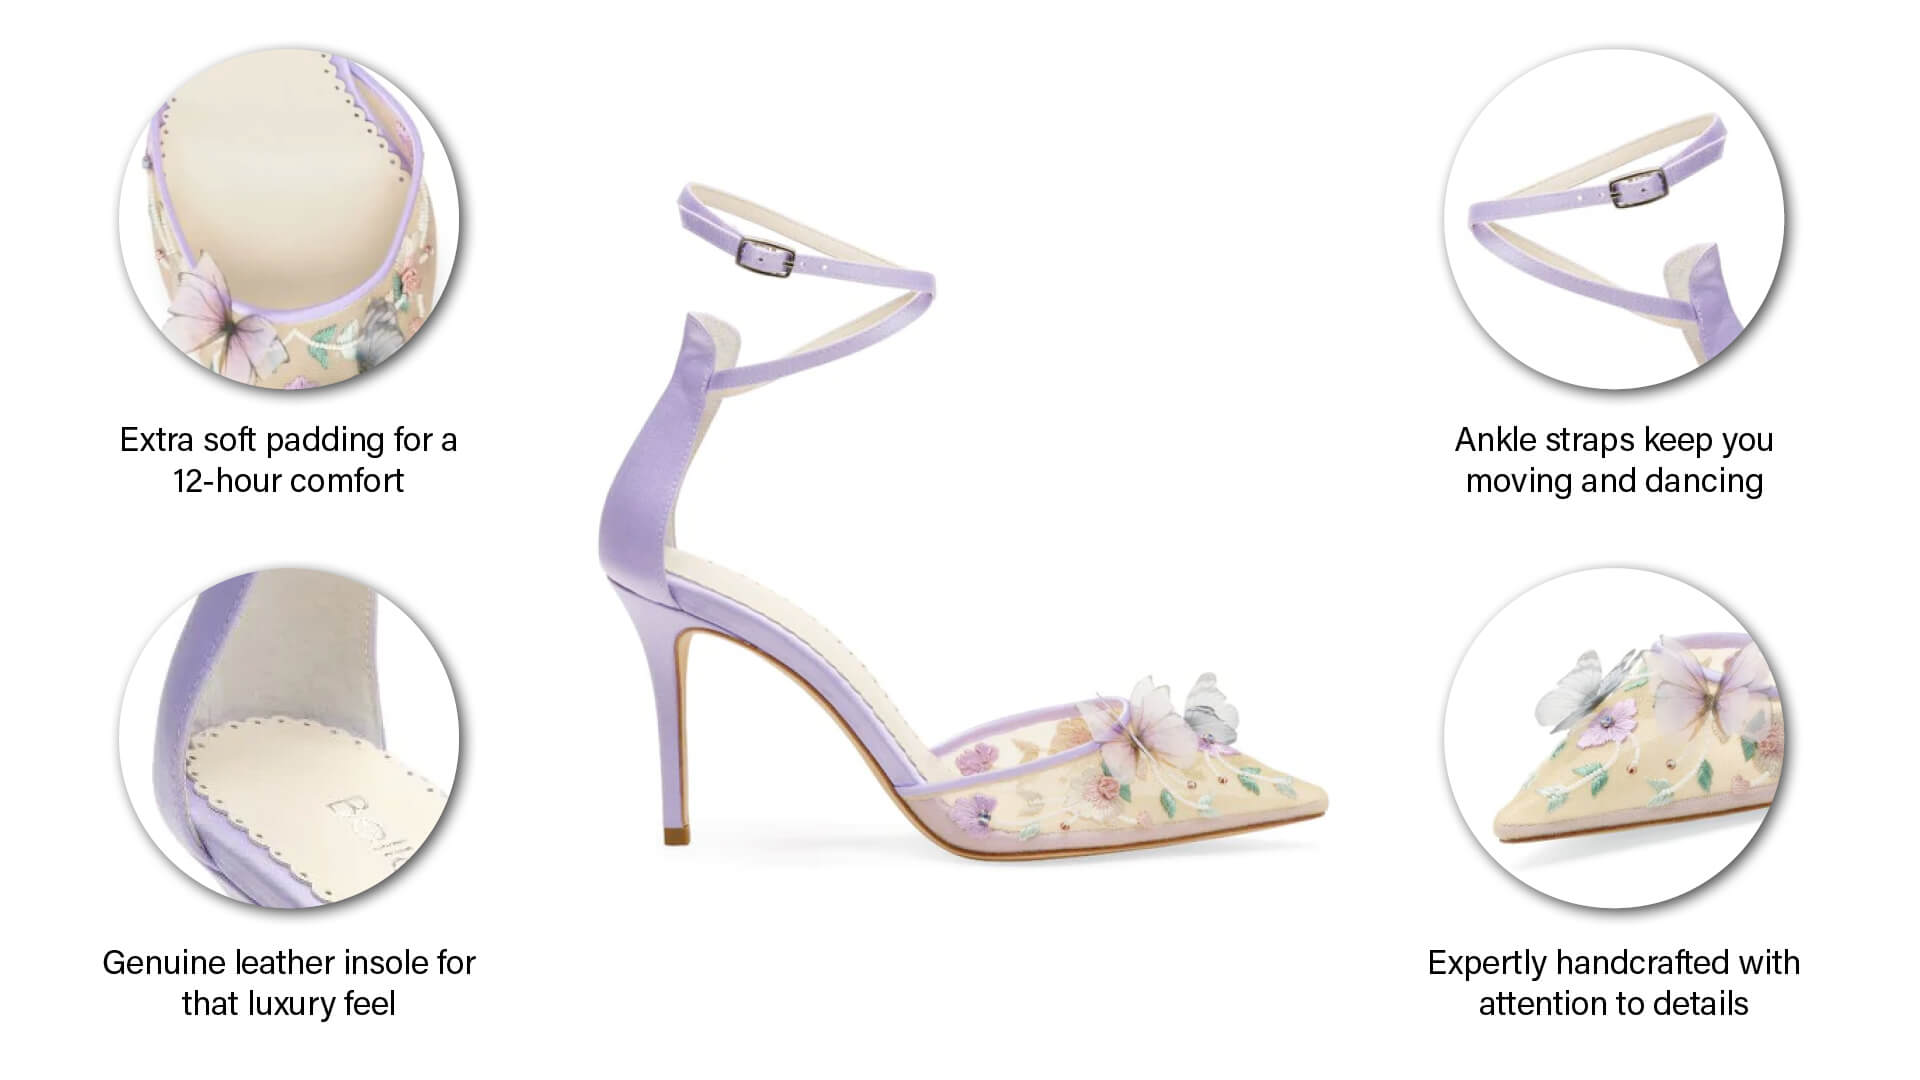 what makes bella belle shoes special